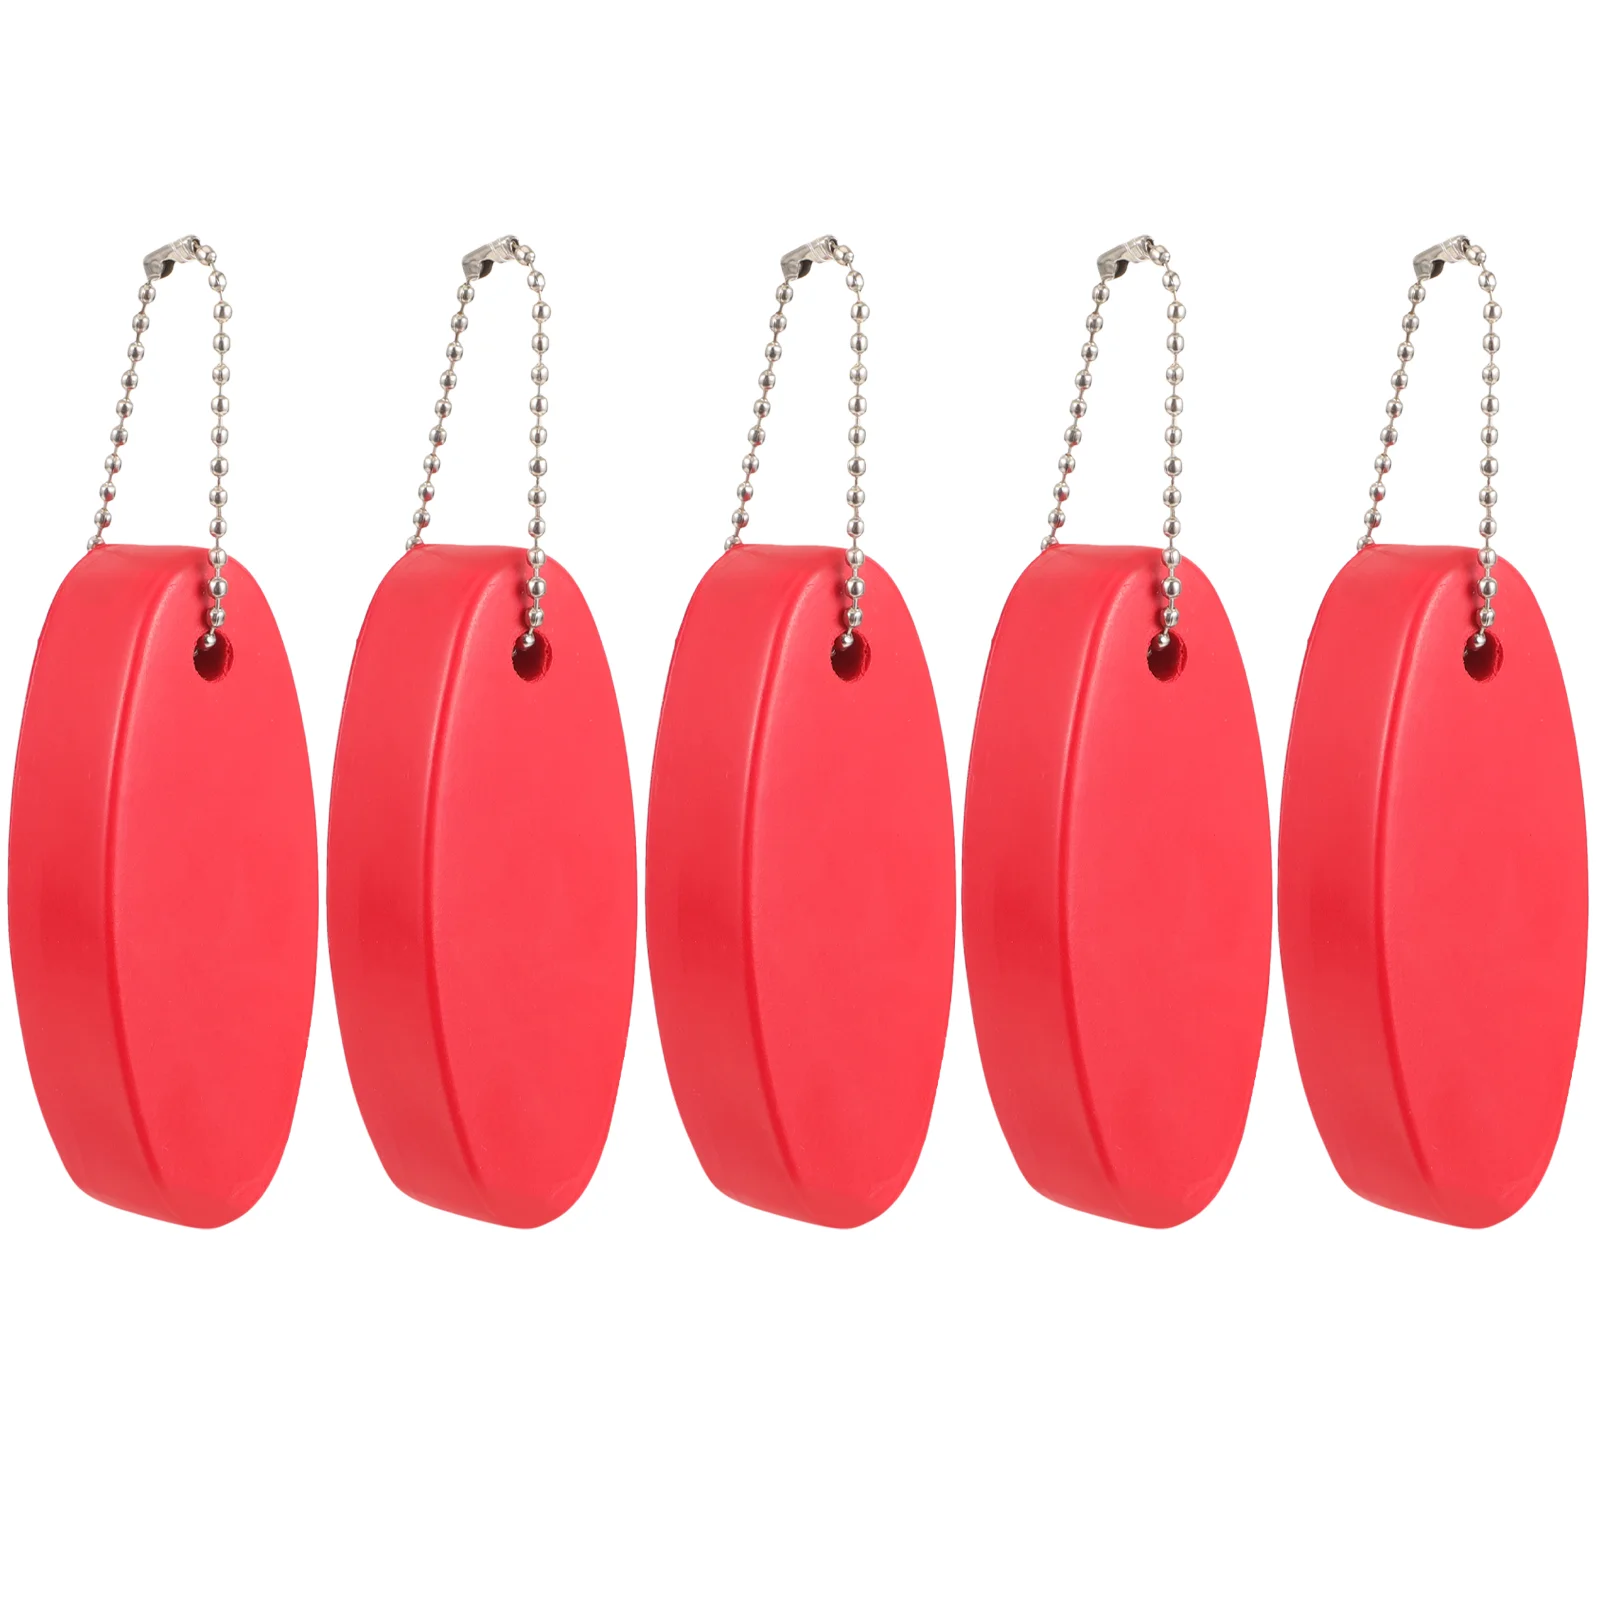 5Pcs Floating Keychains Colored Floating Key Rings Water Sports Keychains Surfboard Pendant Keychains floating keychains colored floating key rings water sports keychains surfboard pendant keychains water sports accessory